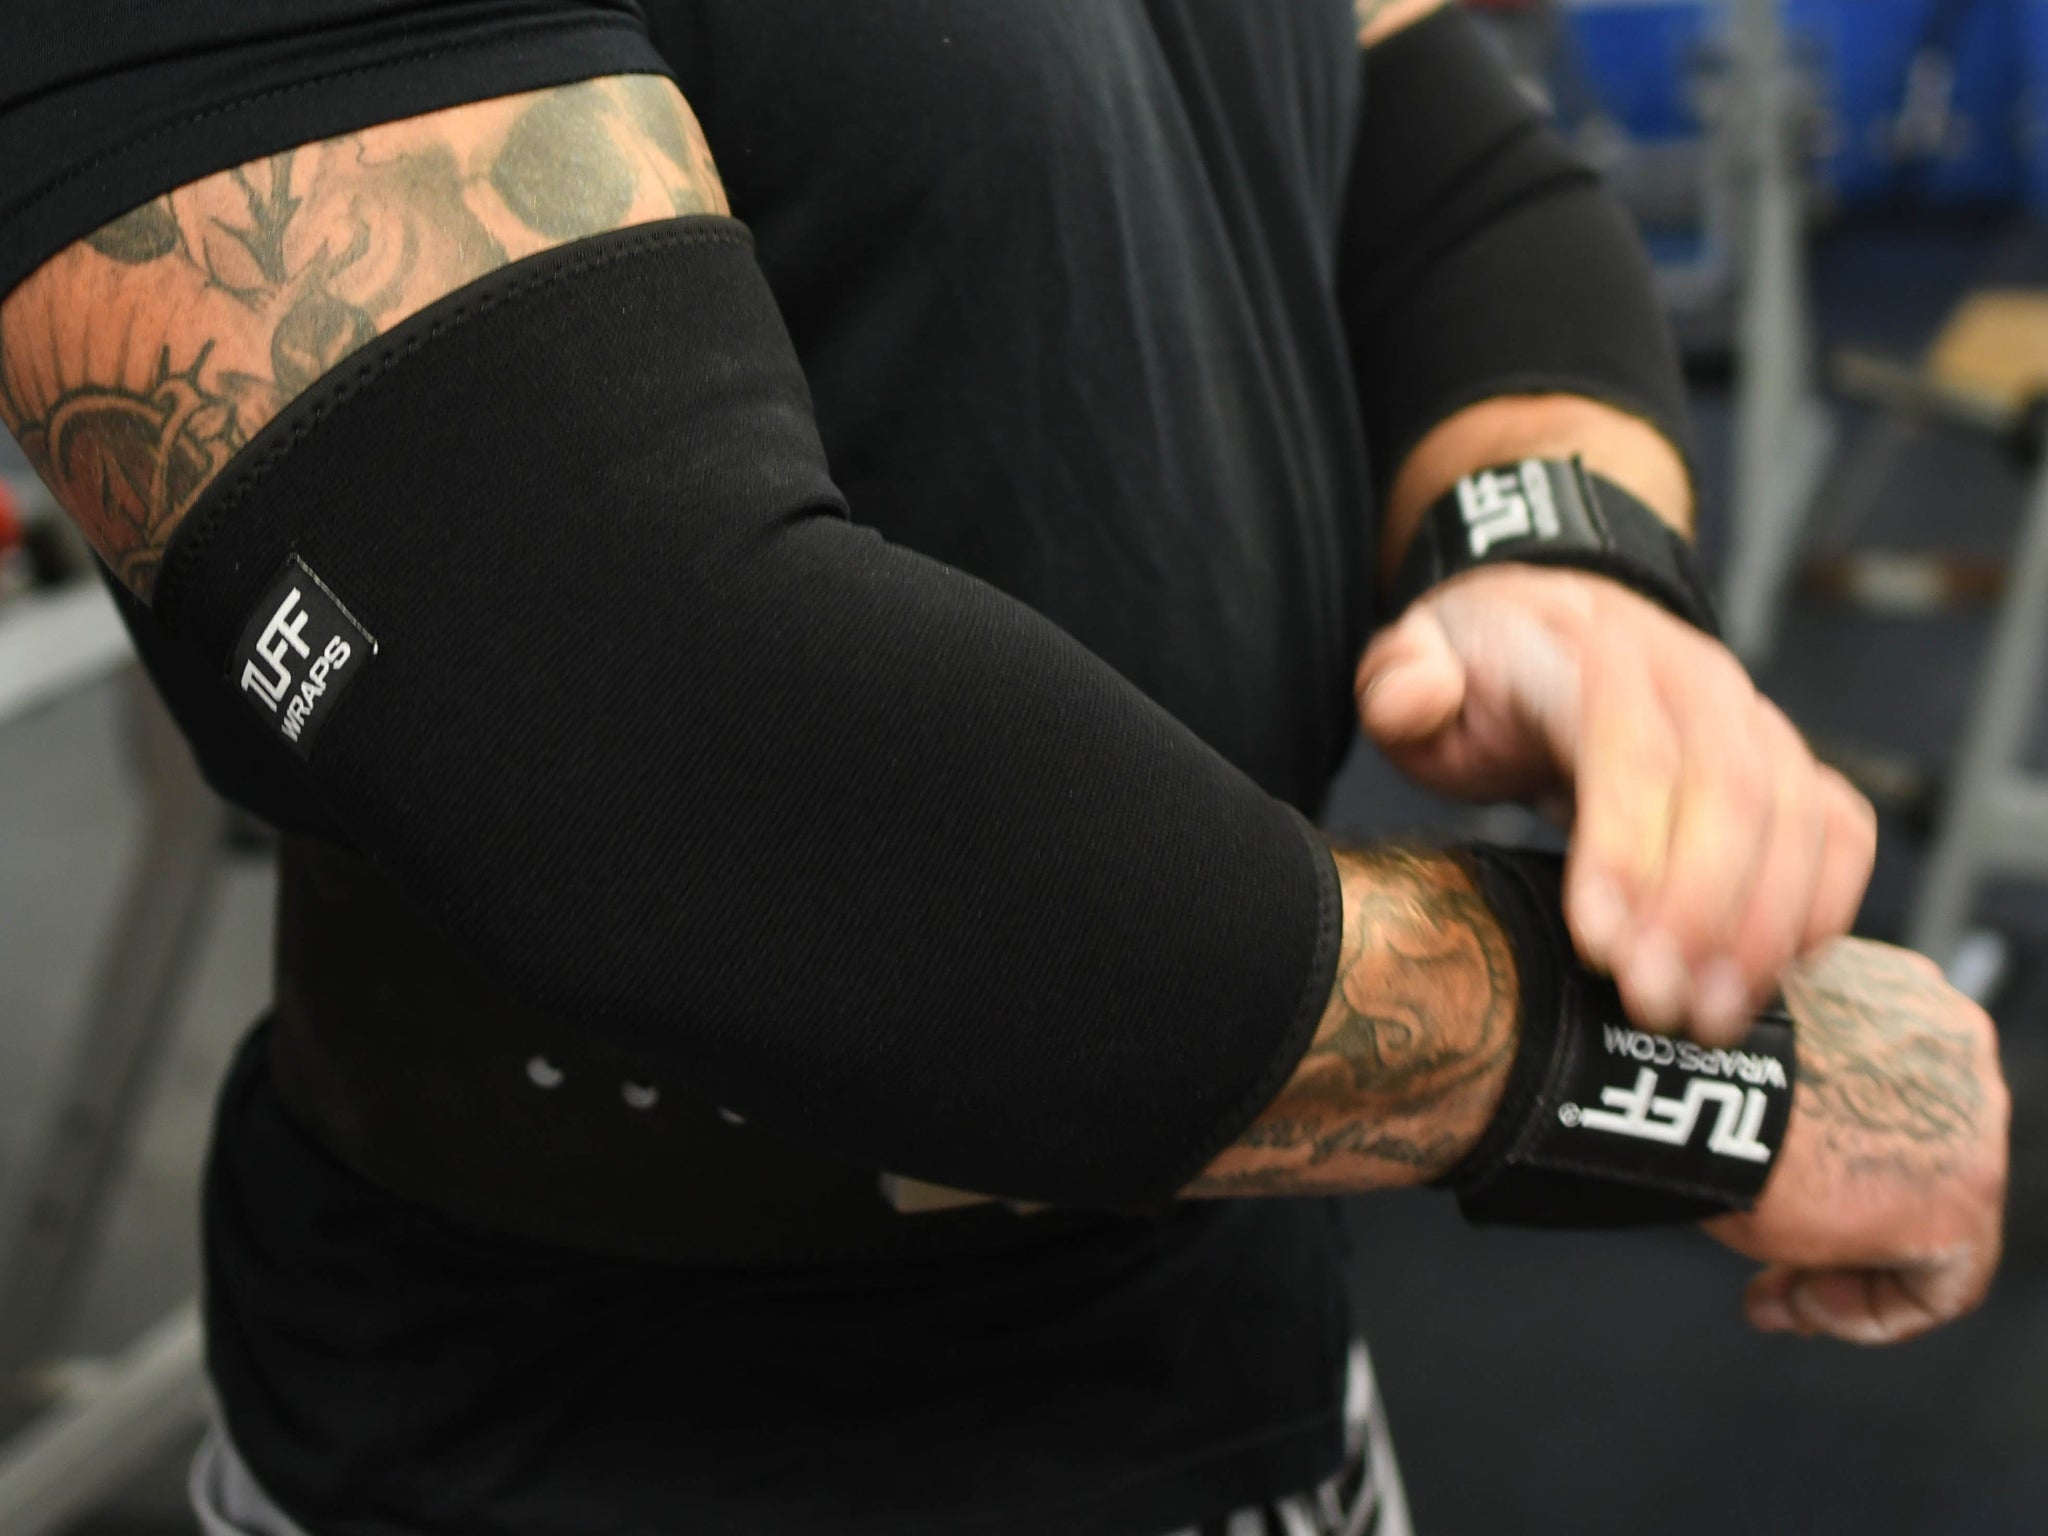 TUFF Double Ply Elbow Sleeves All Black